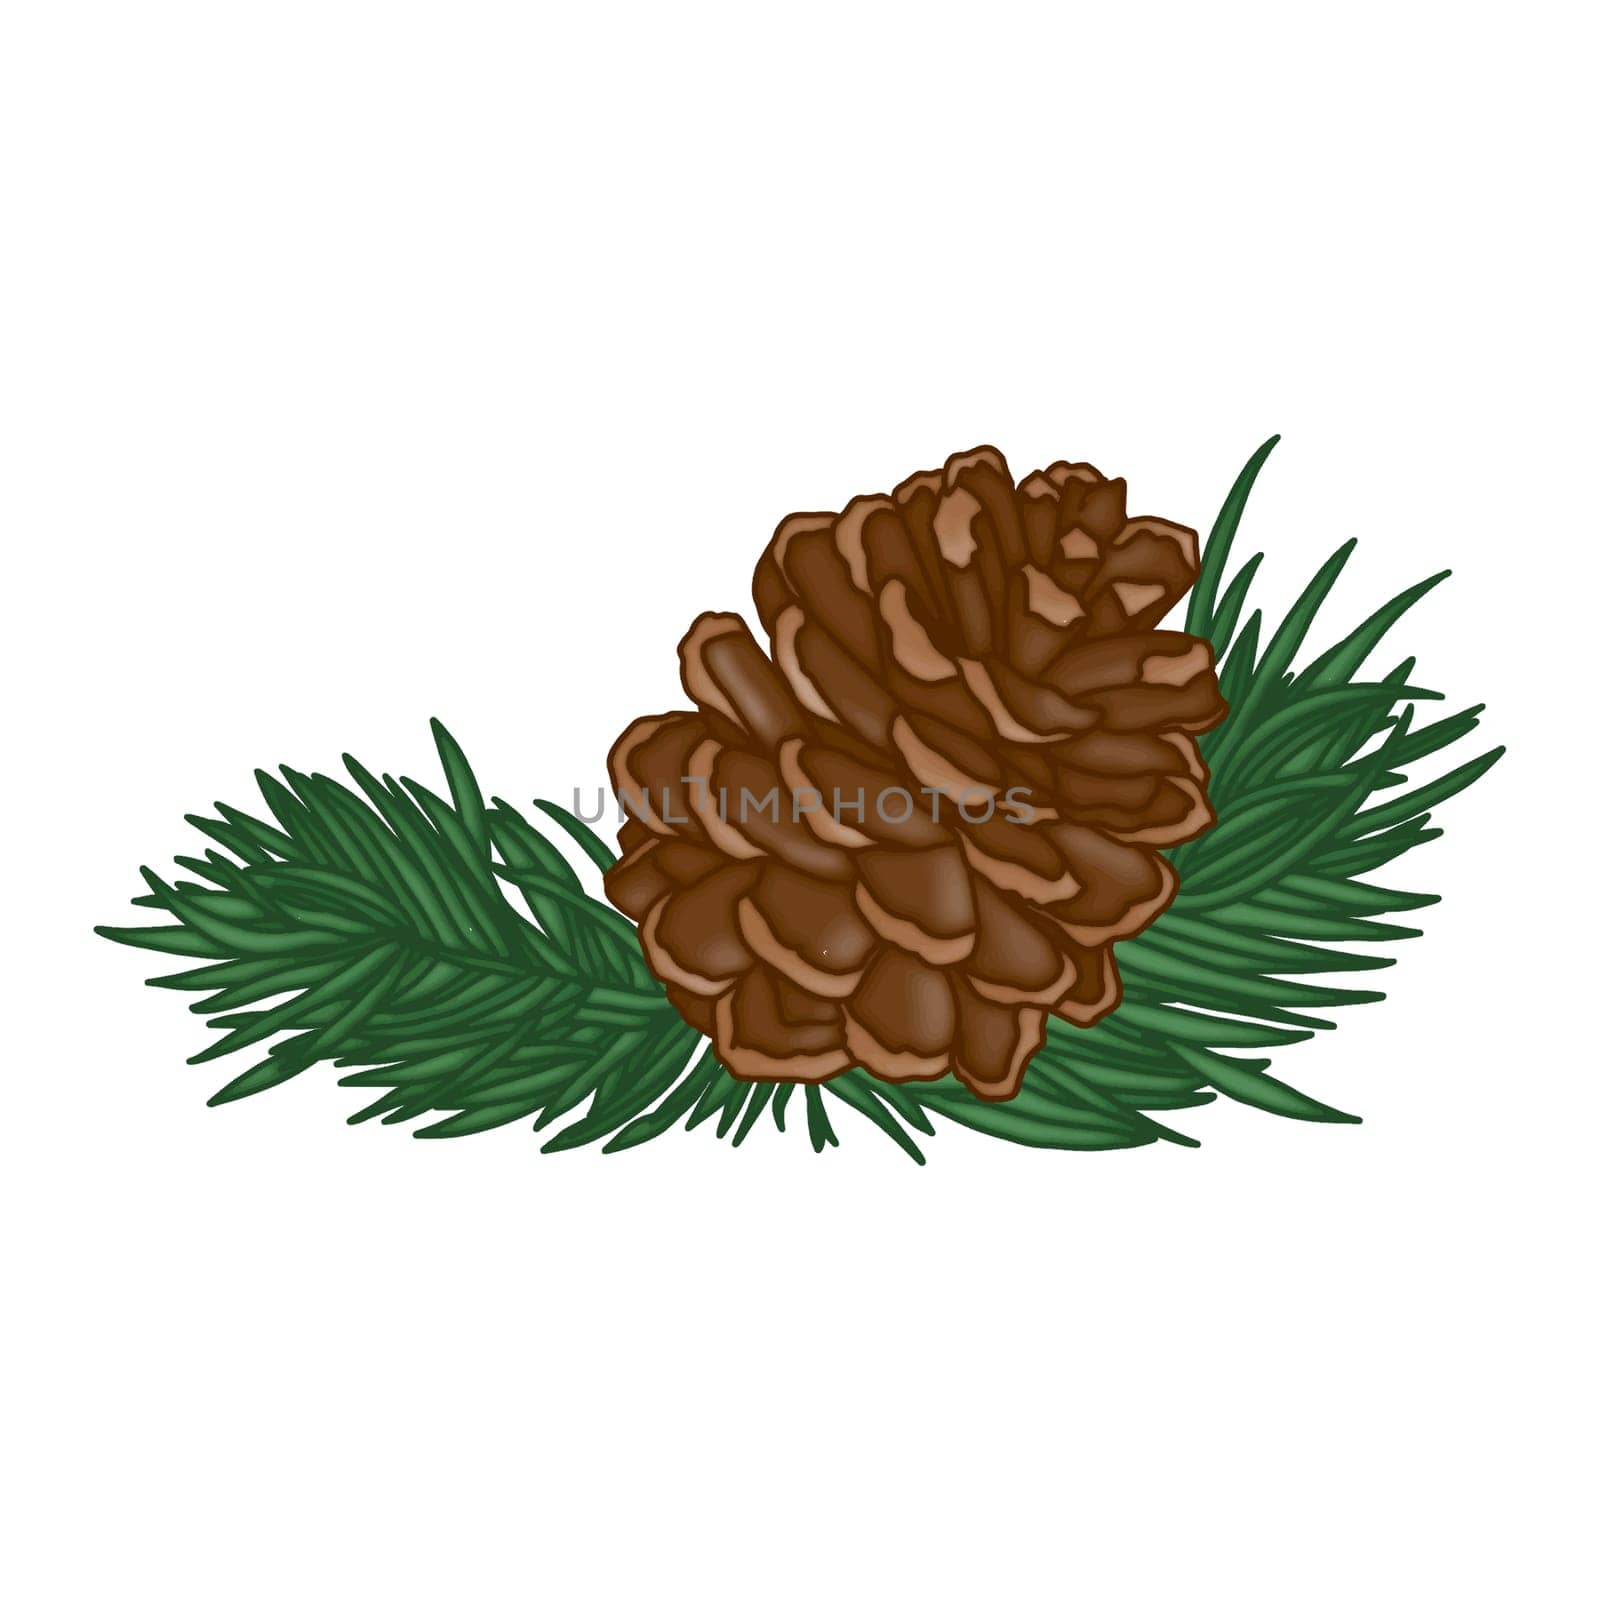 Pinecone with pine leaves clipart winter design element isolated on white background by Skyecreativestudio